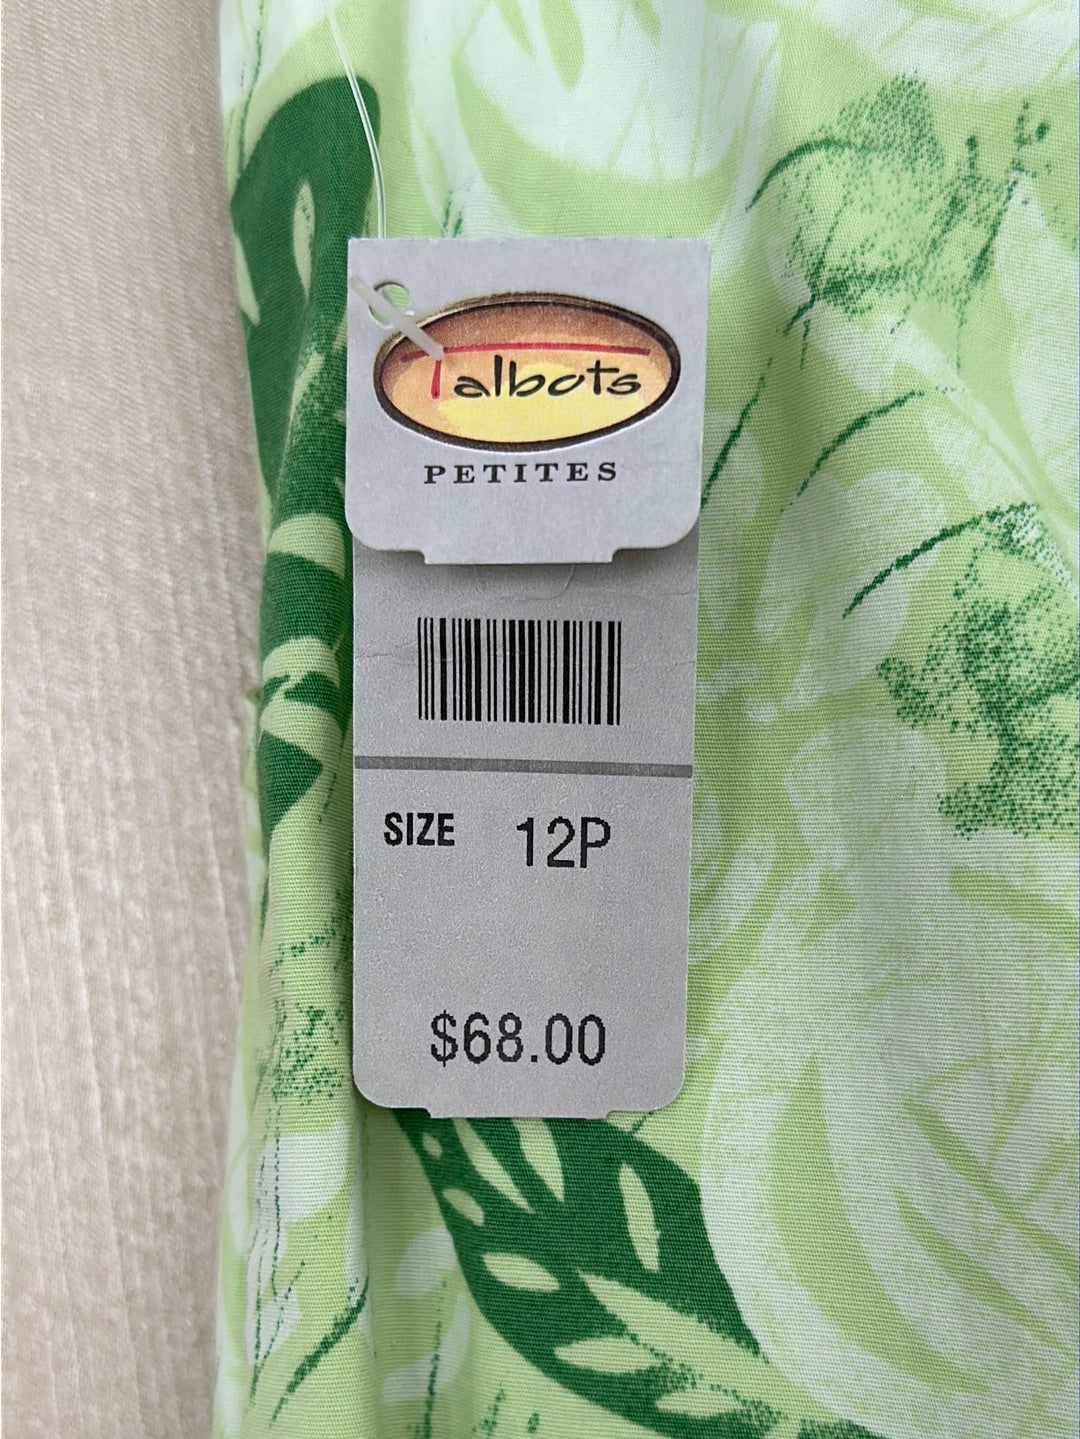 NWT - TALBOTS lime green Leaf Print Lightweight Stretch Cropped Pants - 12P